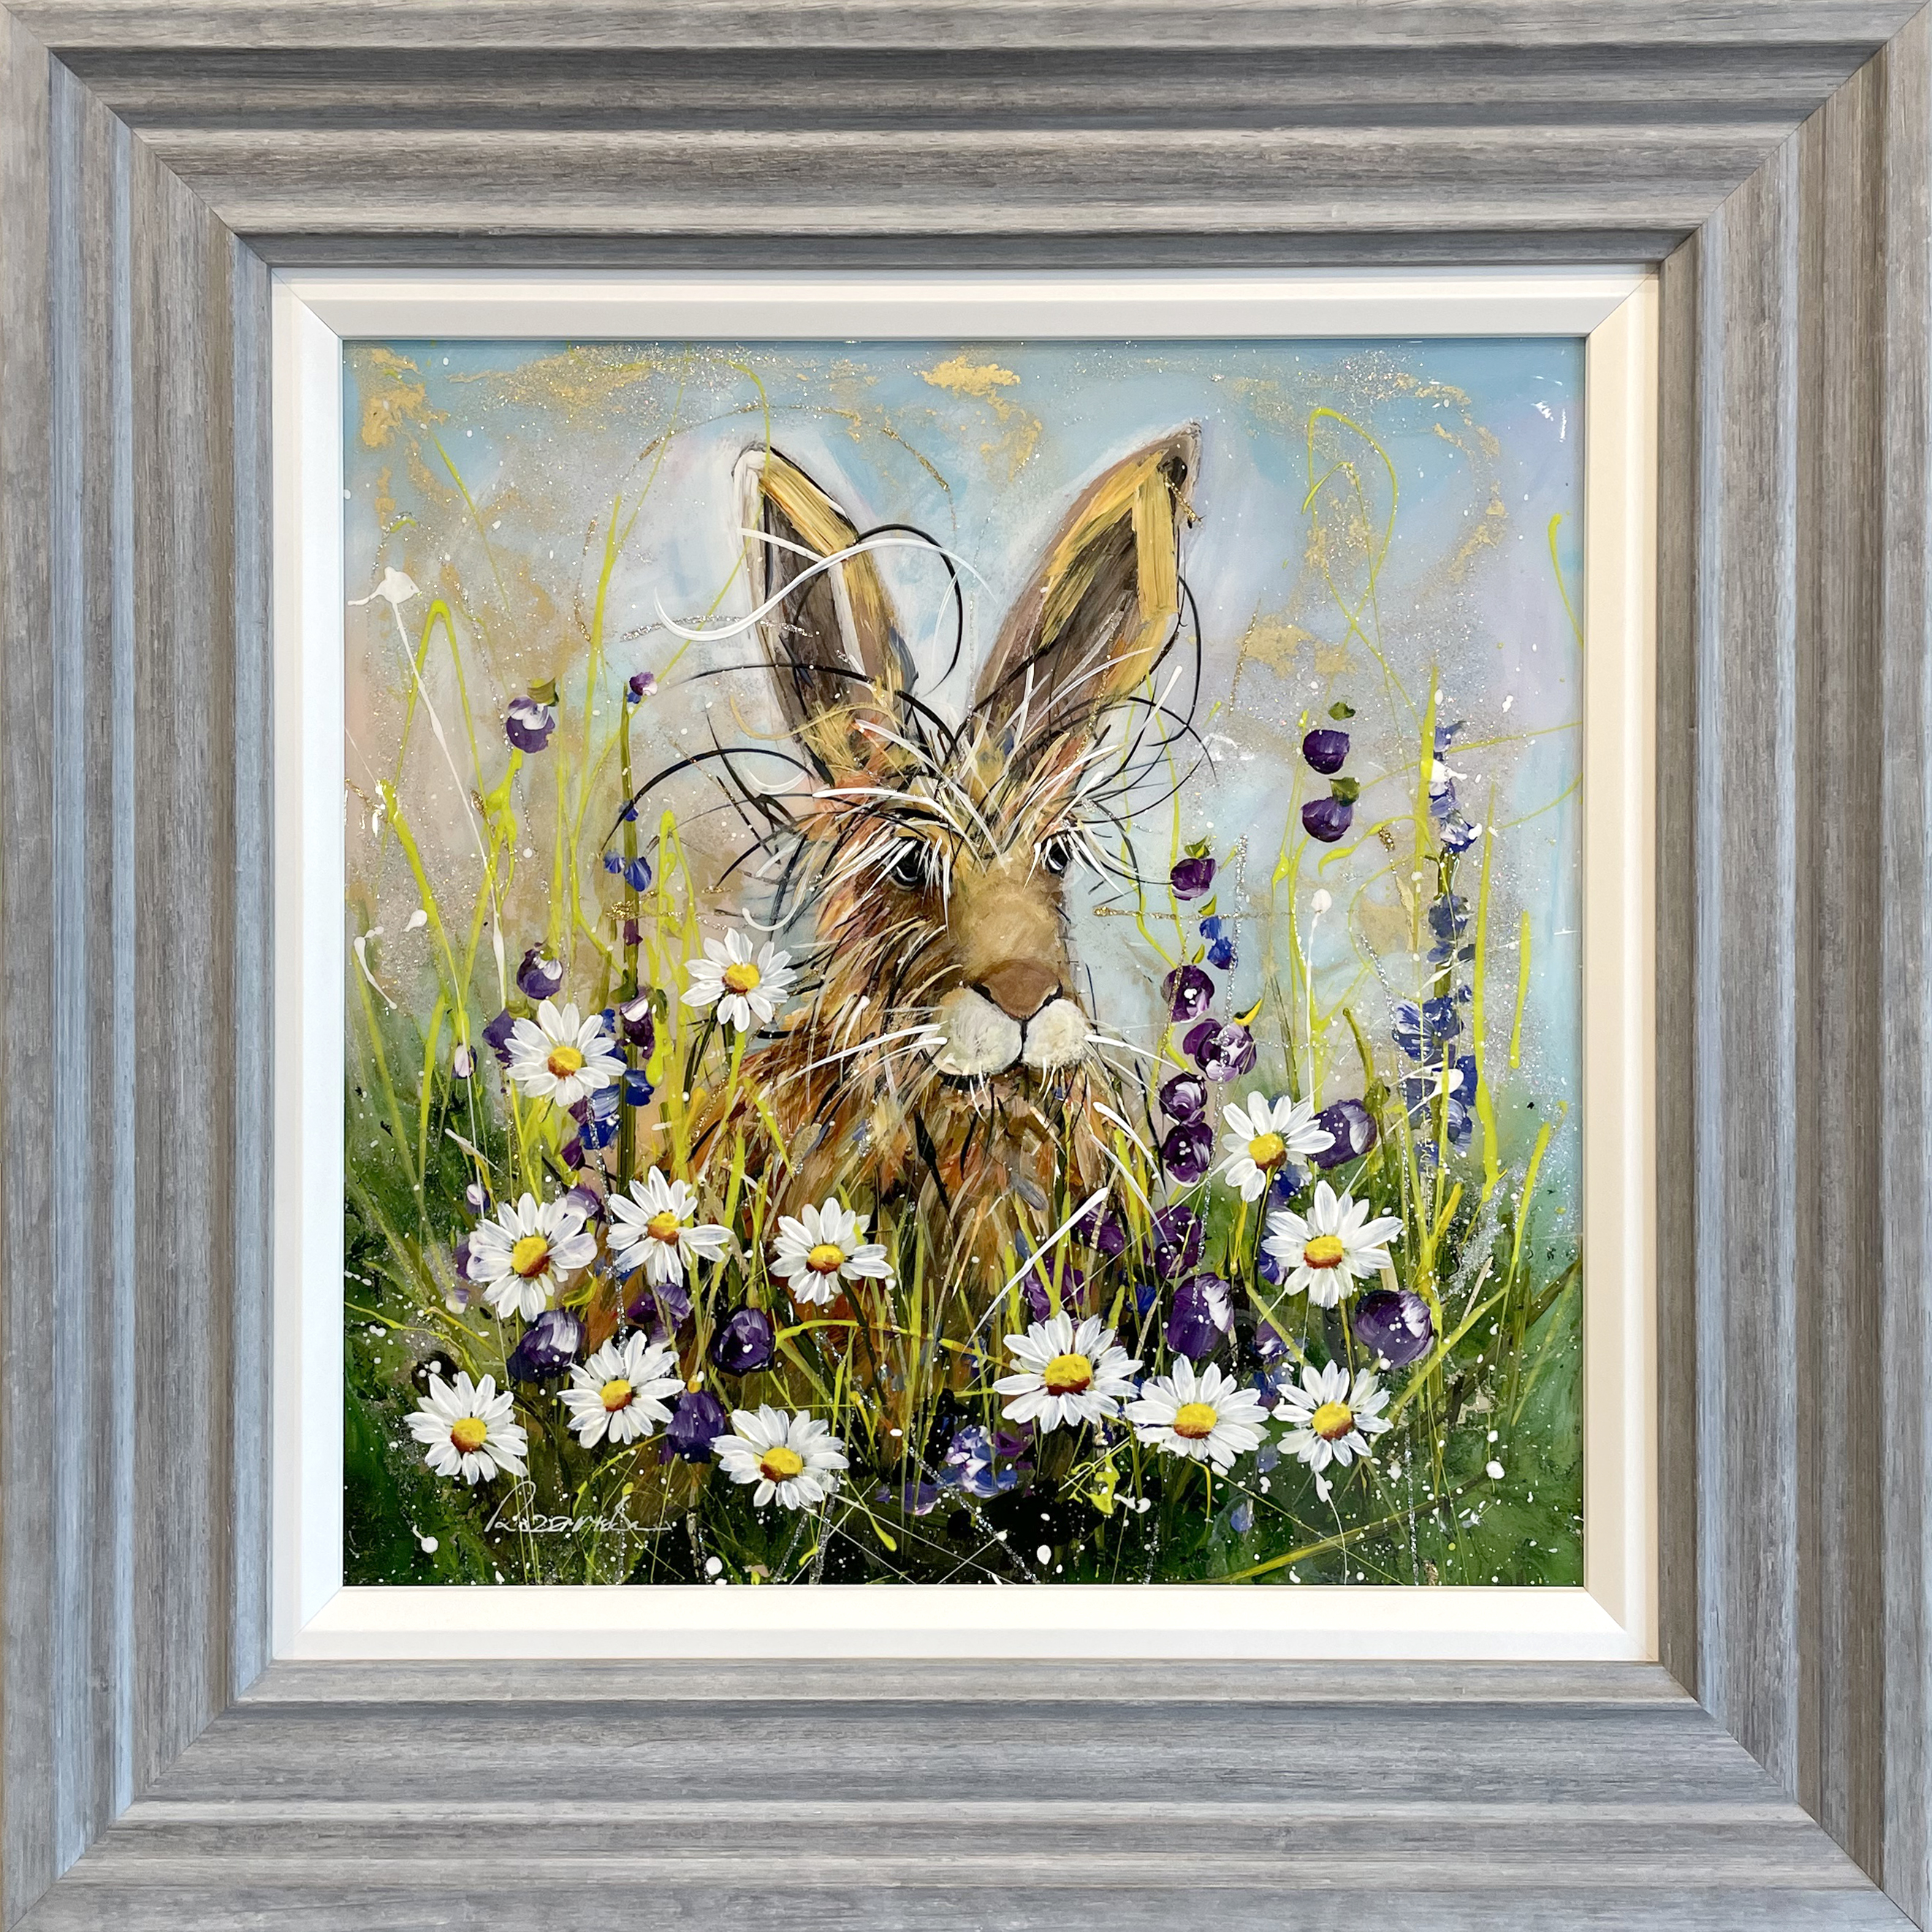 Rozanne Bell, Original Mixed Media Painting, Hiding Amongst the Daisies